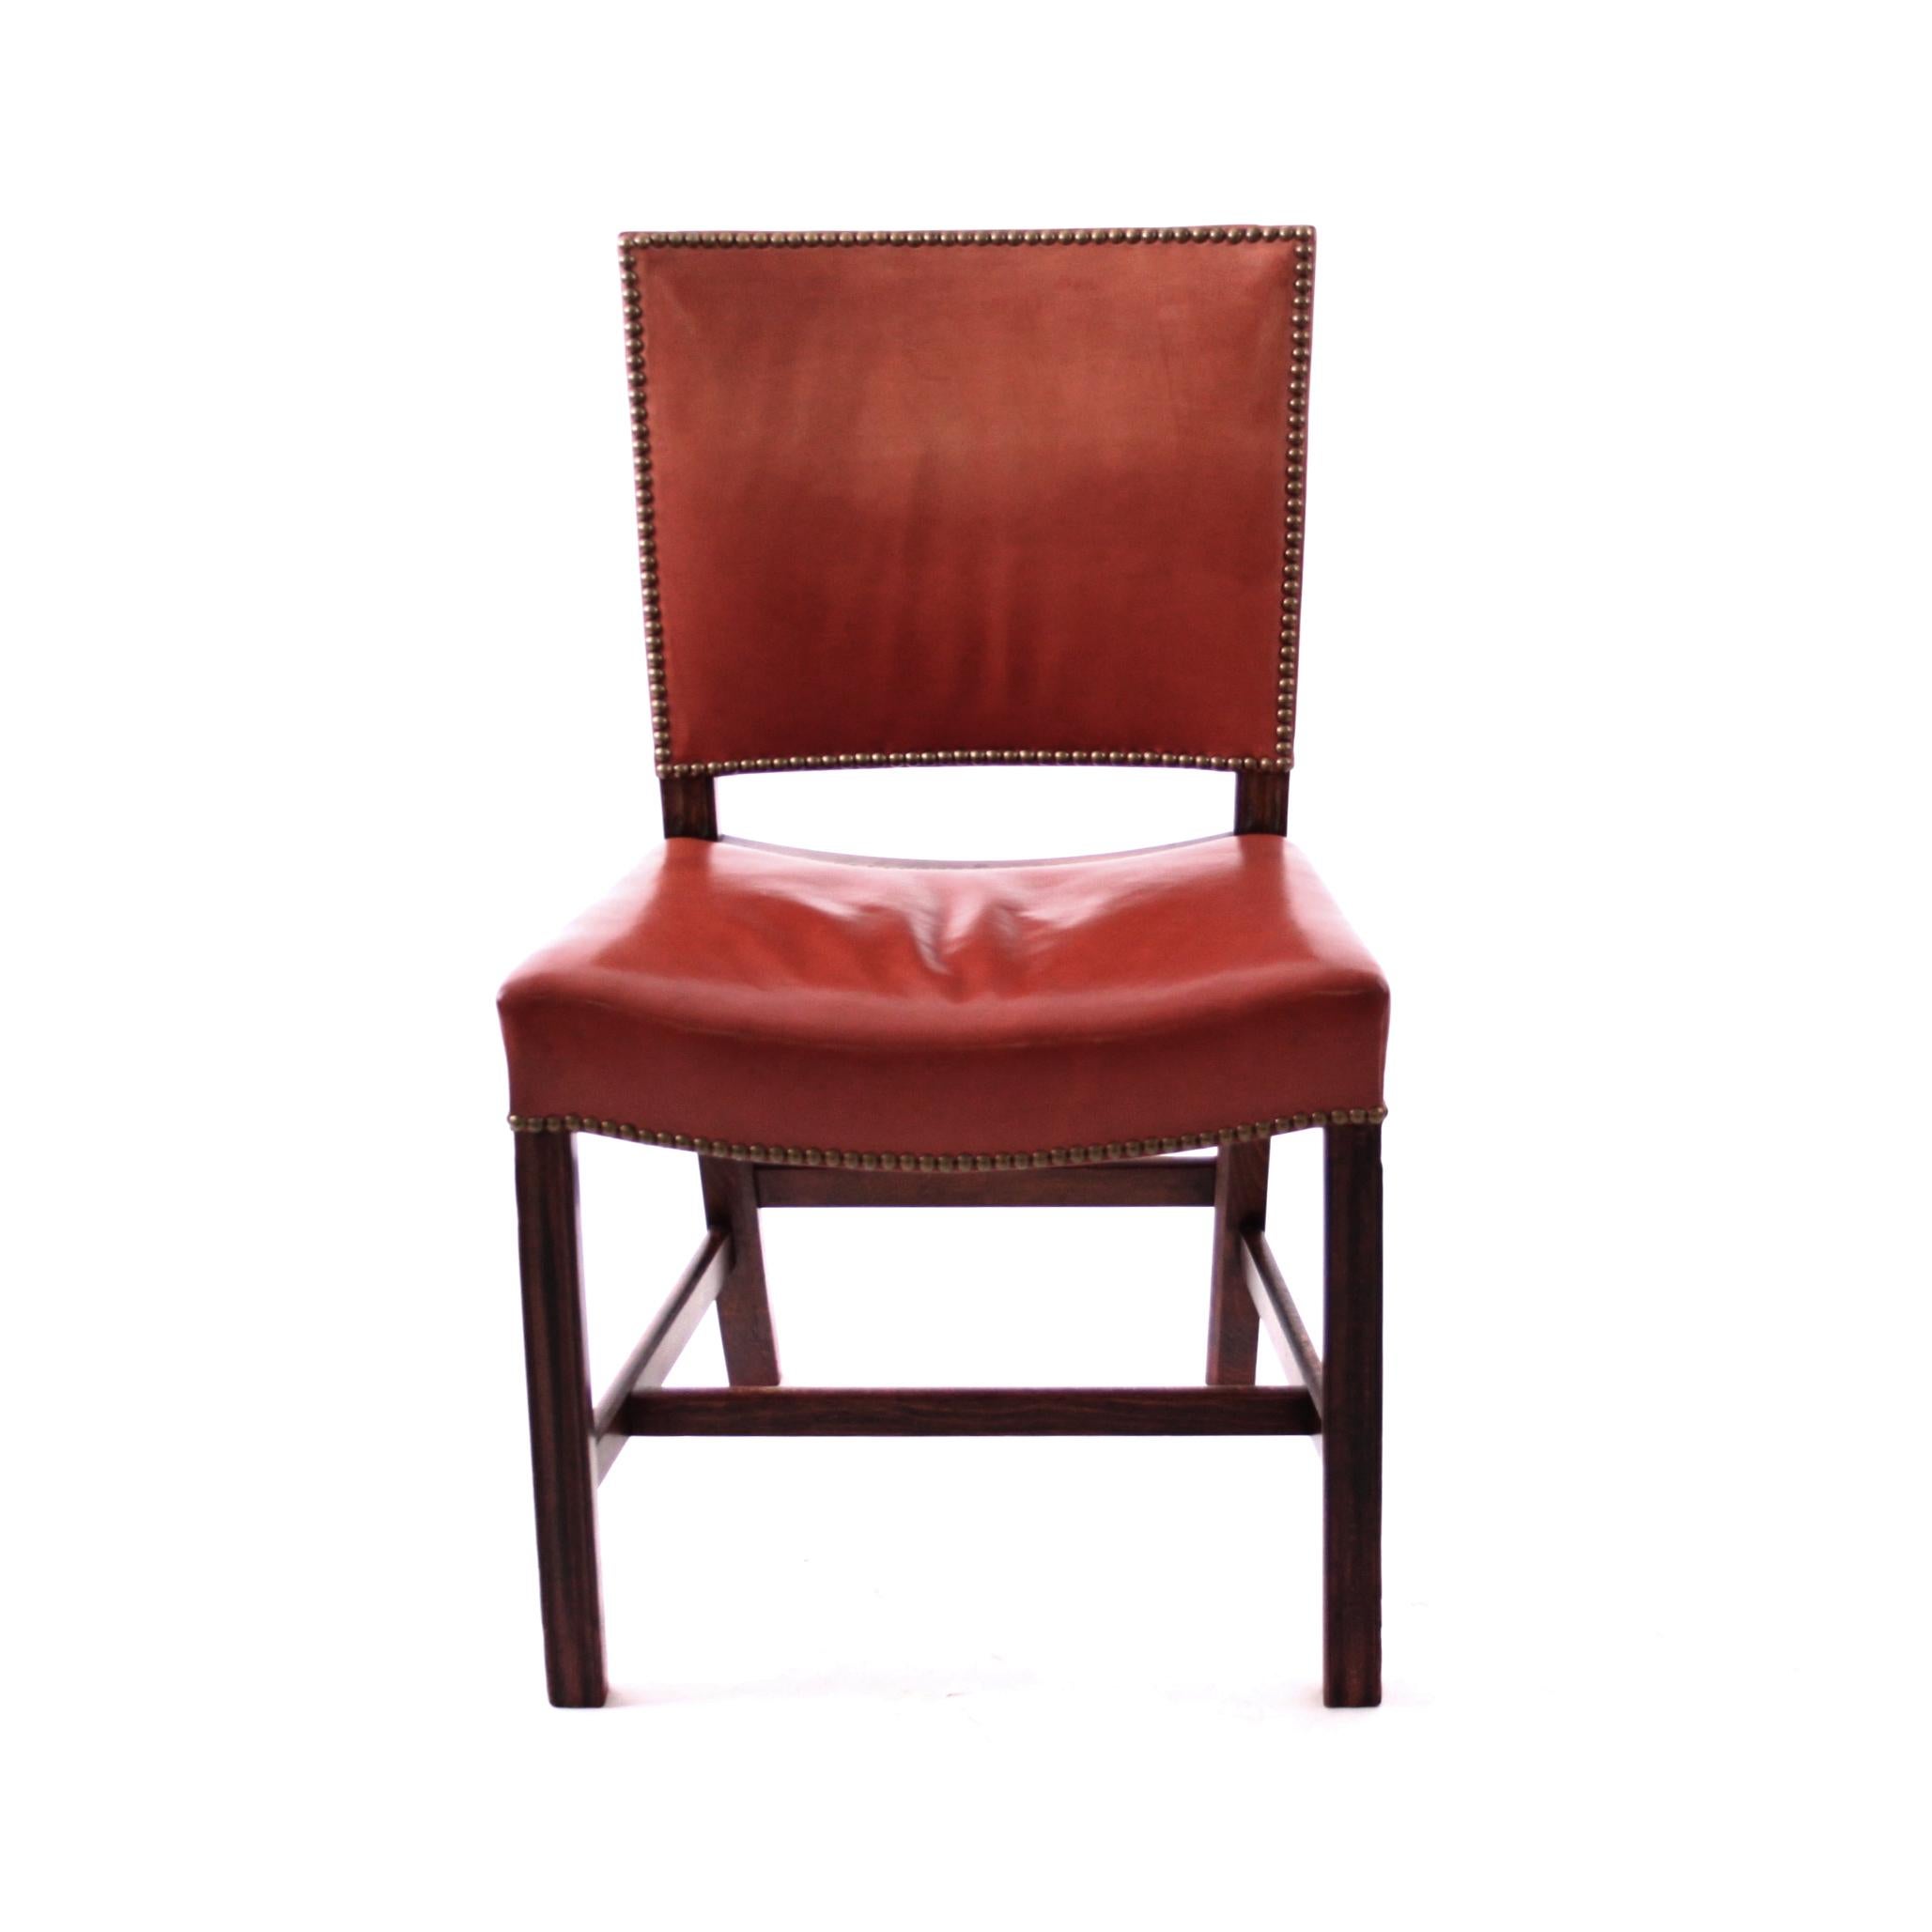 KAARE KLINT & RUD RASMUSSEN SNEDKERIER   -   SCANDINAVIAN MODERN

A beautiful set of six of the iconic Kaare Klint 'Red Chair' or 'Barcelona Chair' by Kaare Klint.

These examples made 1940s by Rud. Rasmussen Cabinetmakers, with maker's paper label.